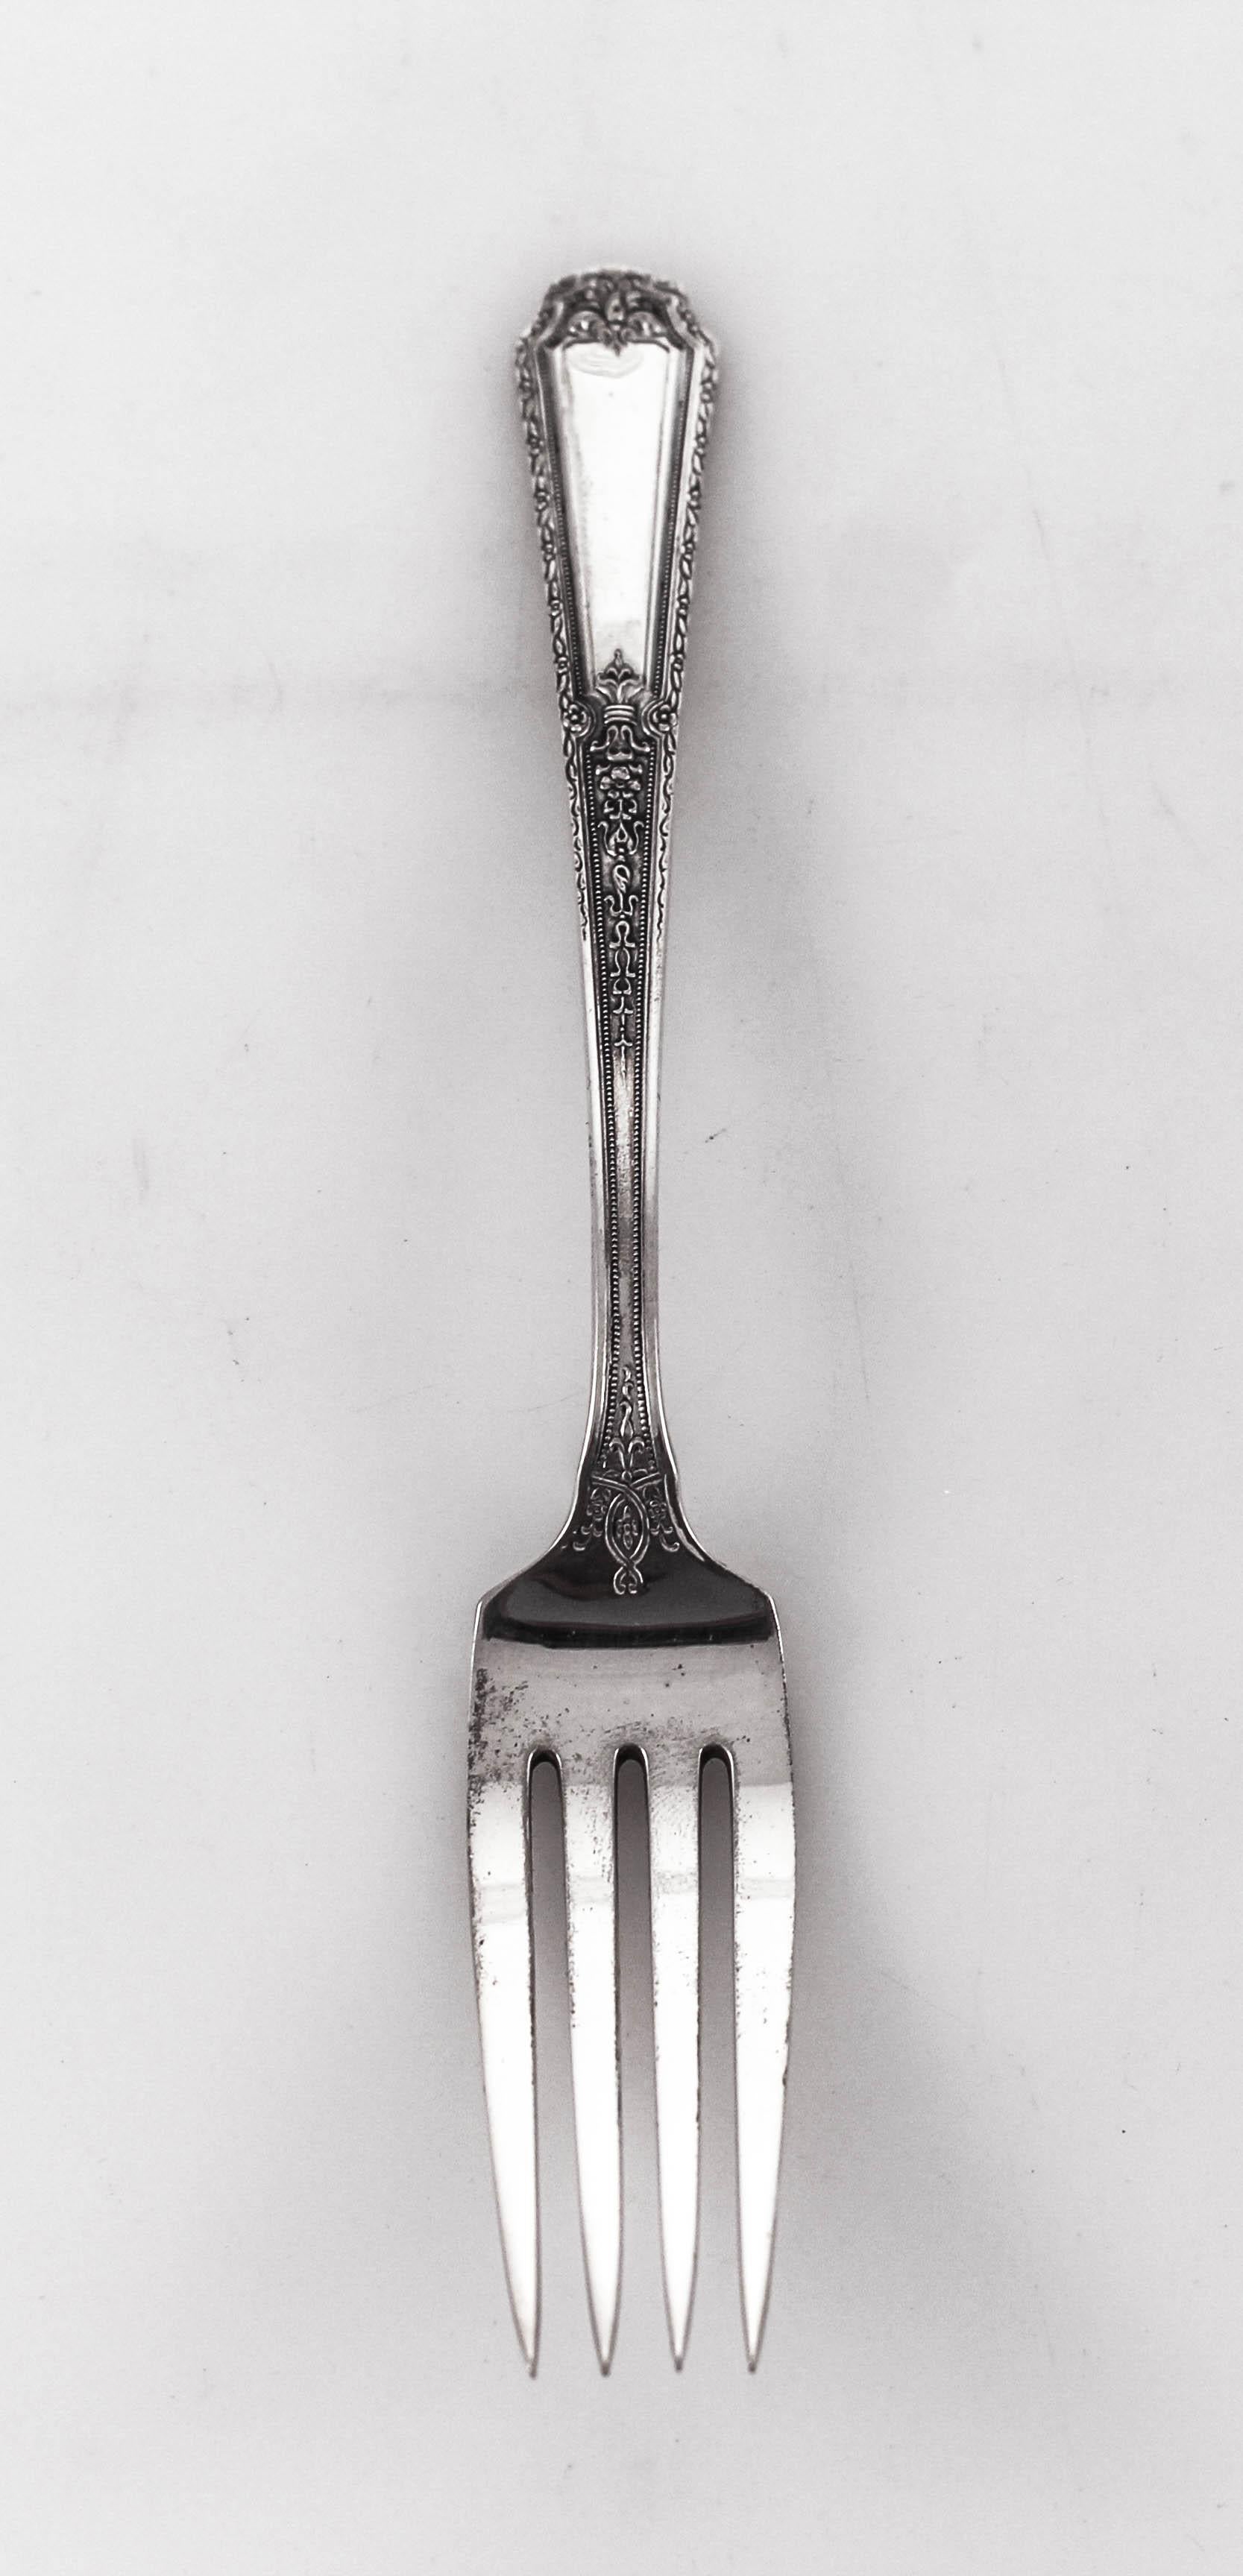 This complete set of sterling silver flatware is a Classic beauty. Tailored with very Fine detail, this set will never go out of style. The perfect set to pass from generation to generation; holding memories of holidays and celebrations gone by.